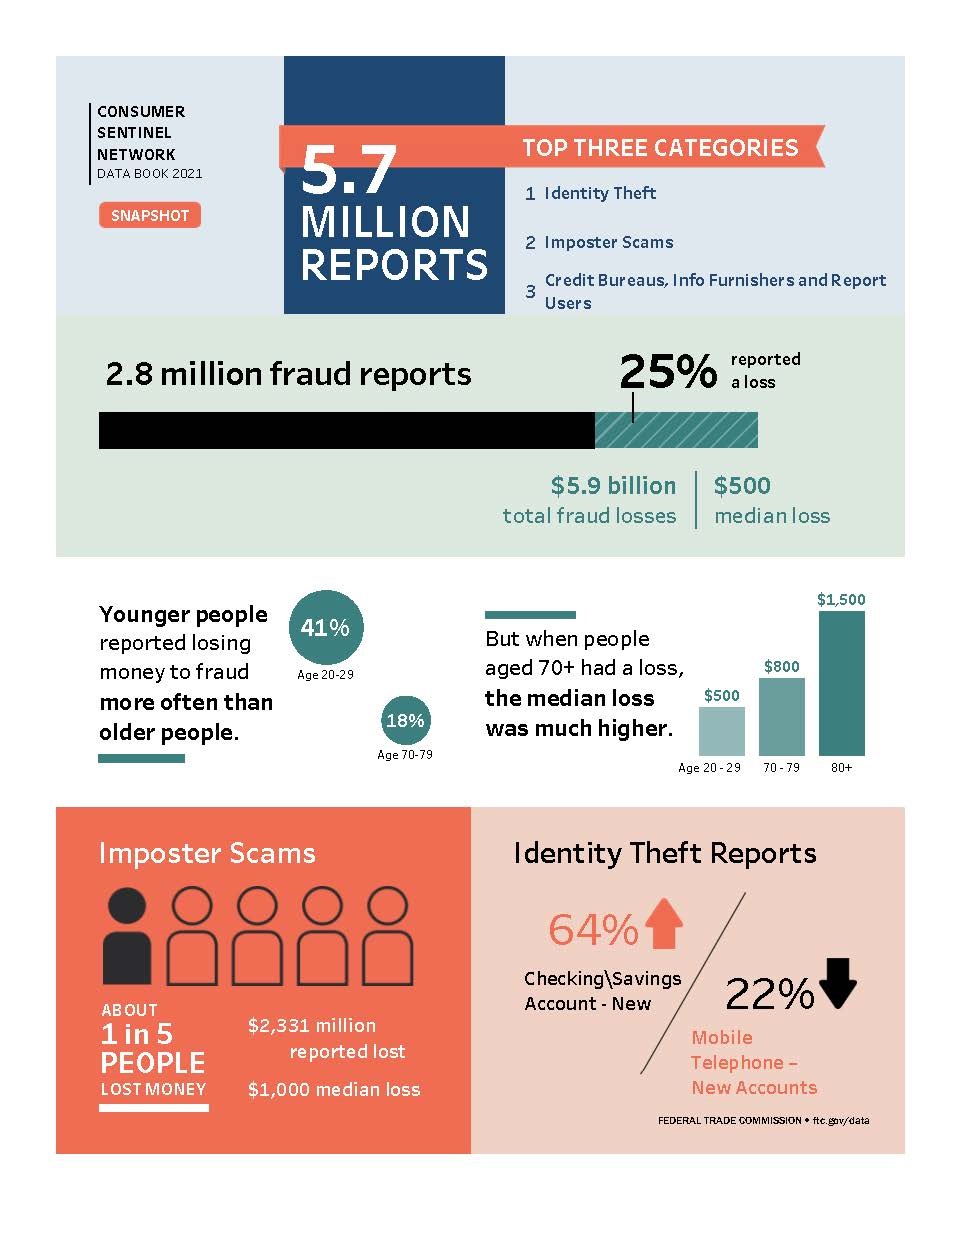 Link to interactive infographic showing Consumer Sentinel reports.